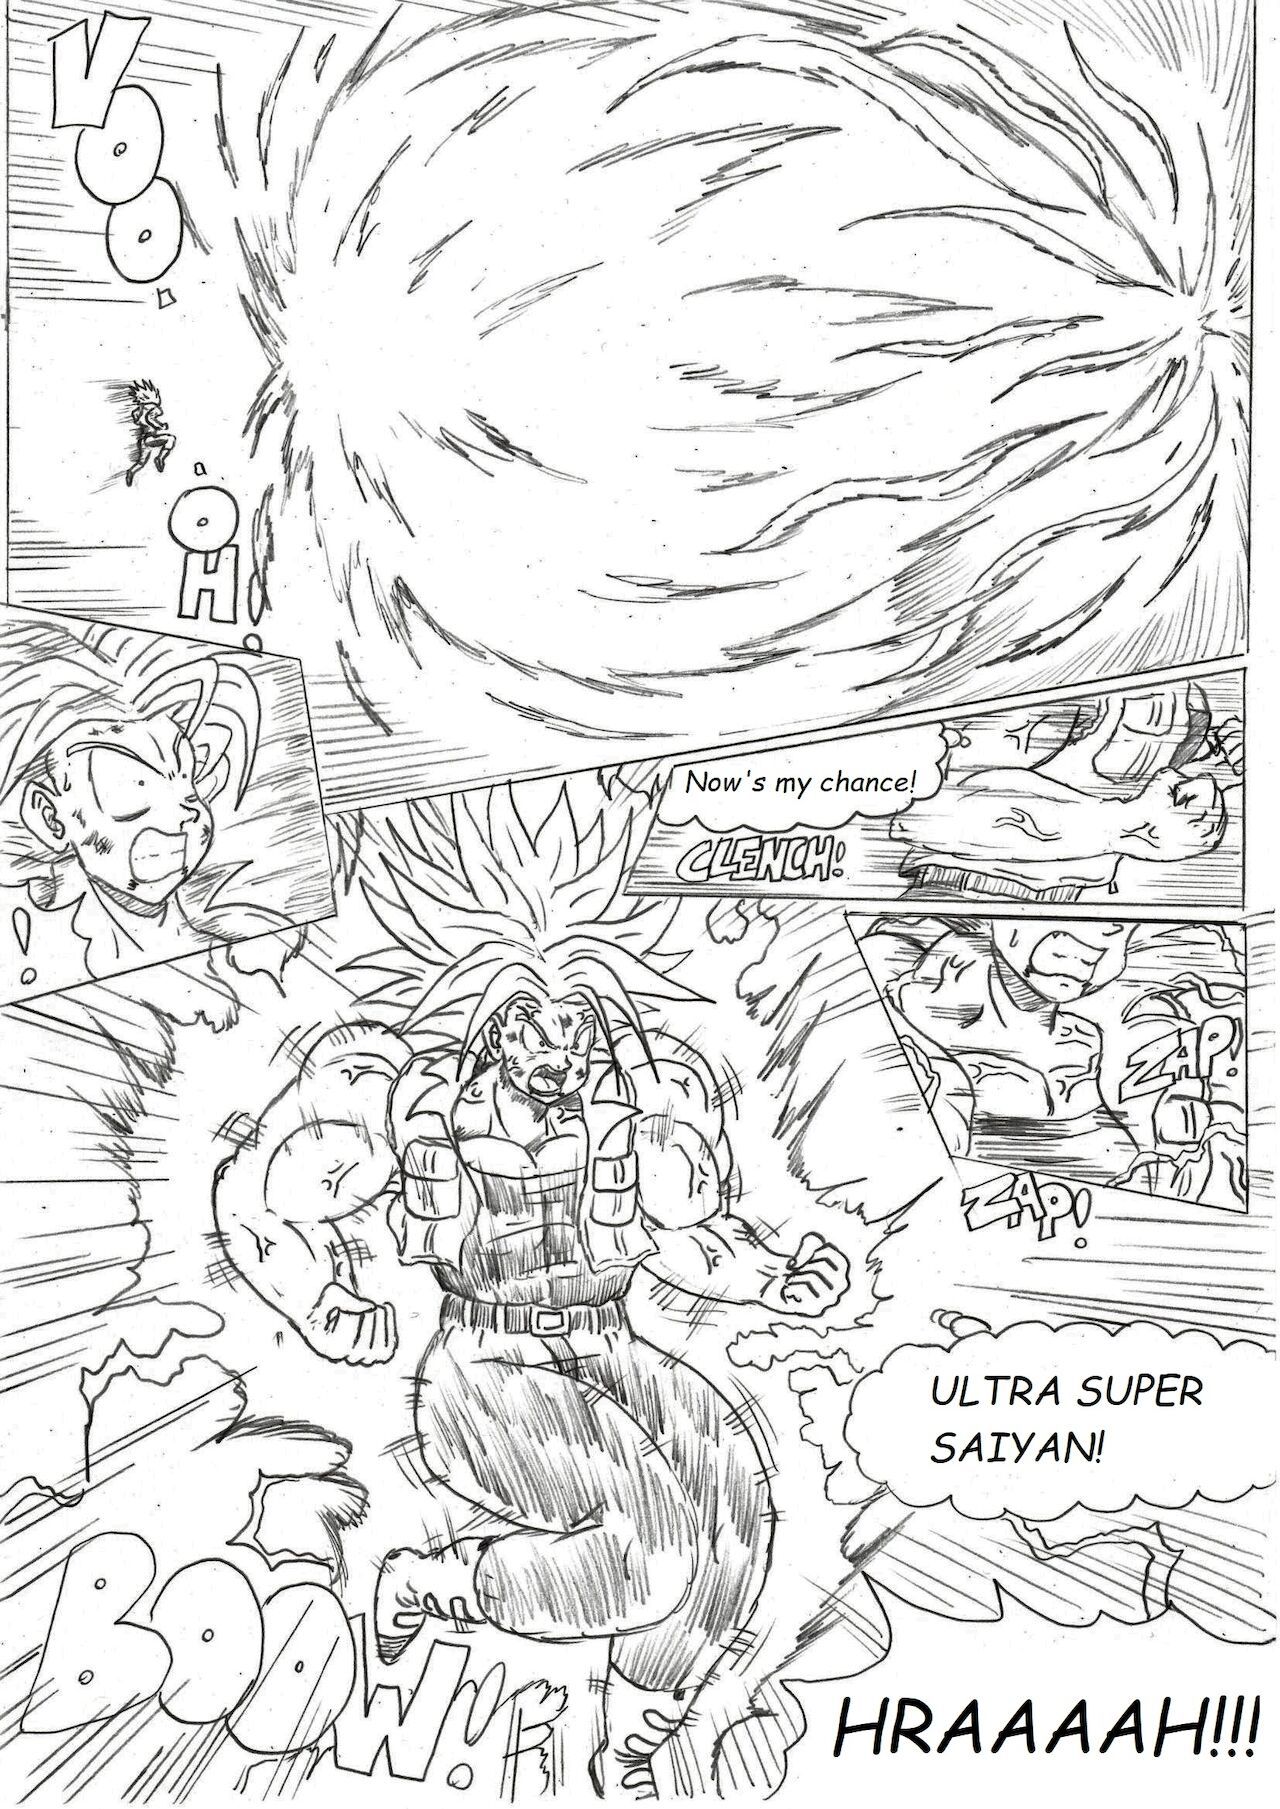 [TheWriteFiction] Dragonball Z Golden Age - Chapter 3 - The Strange Tournament (Ongoing) 68